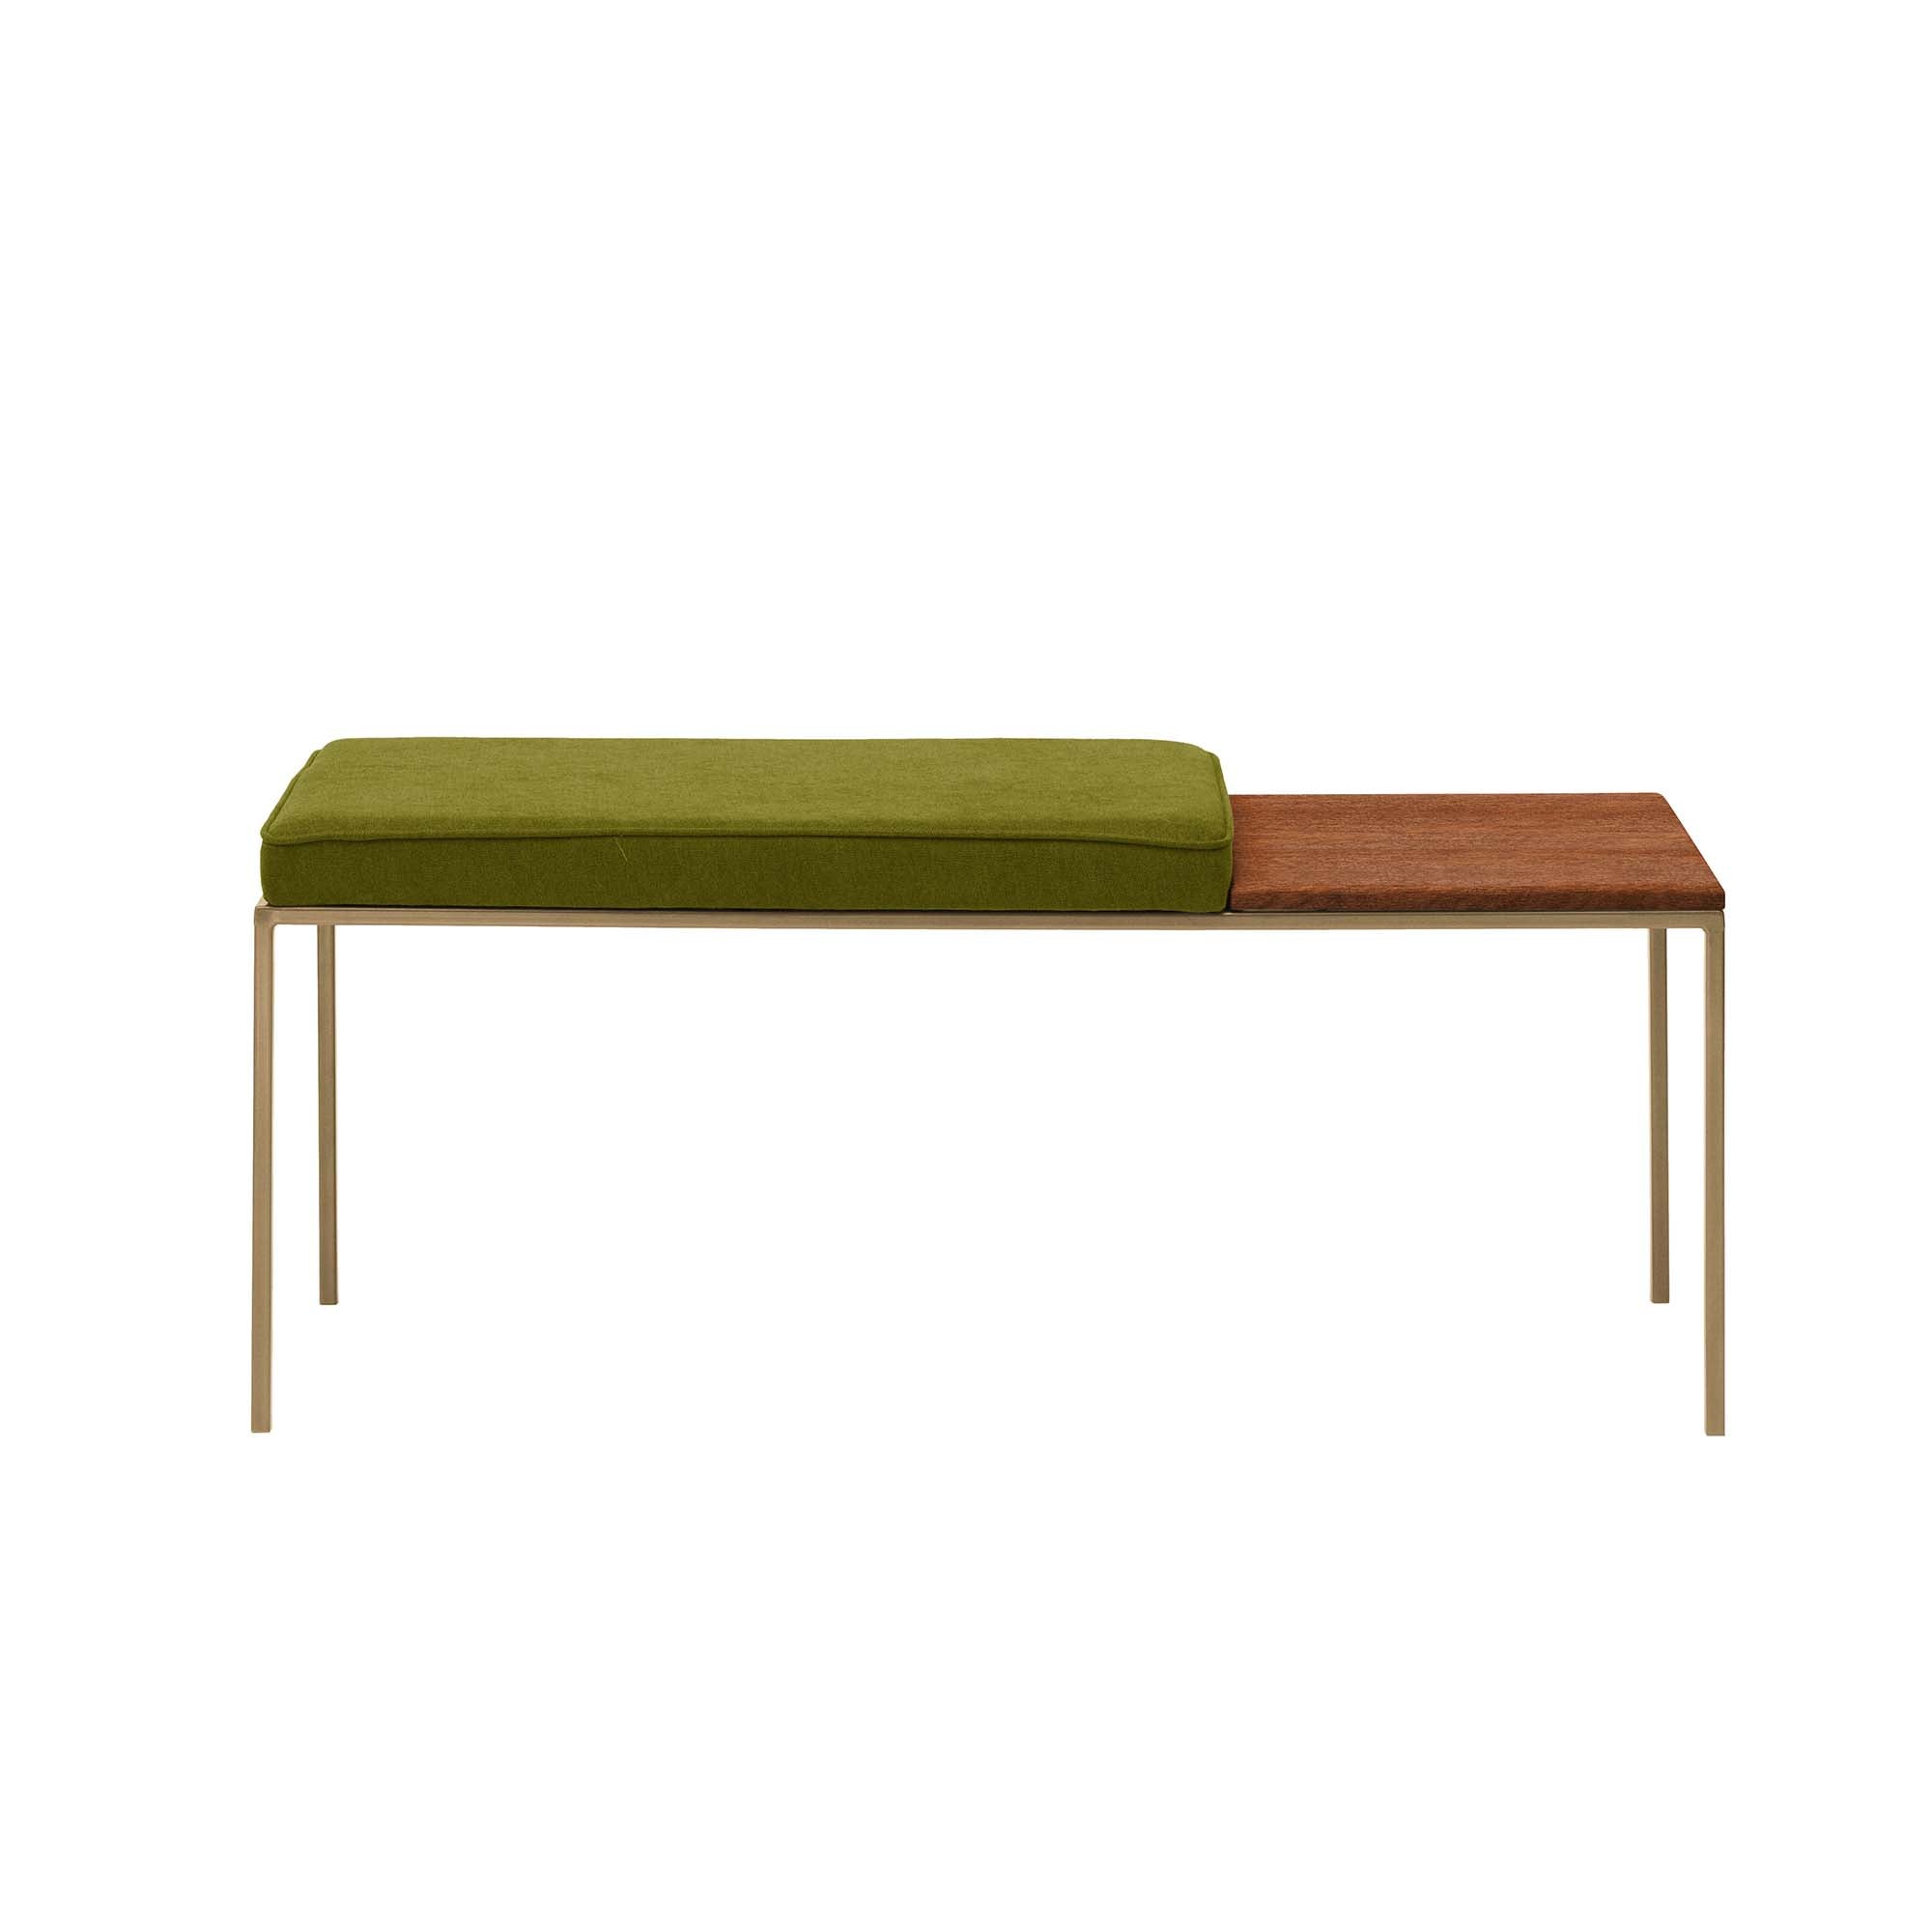 Beech Wood Seat, Walnut Colour green fabric, yellow frame, front view